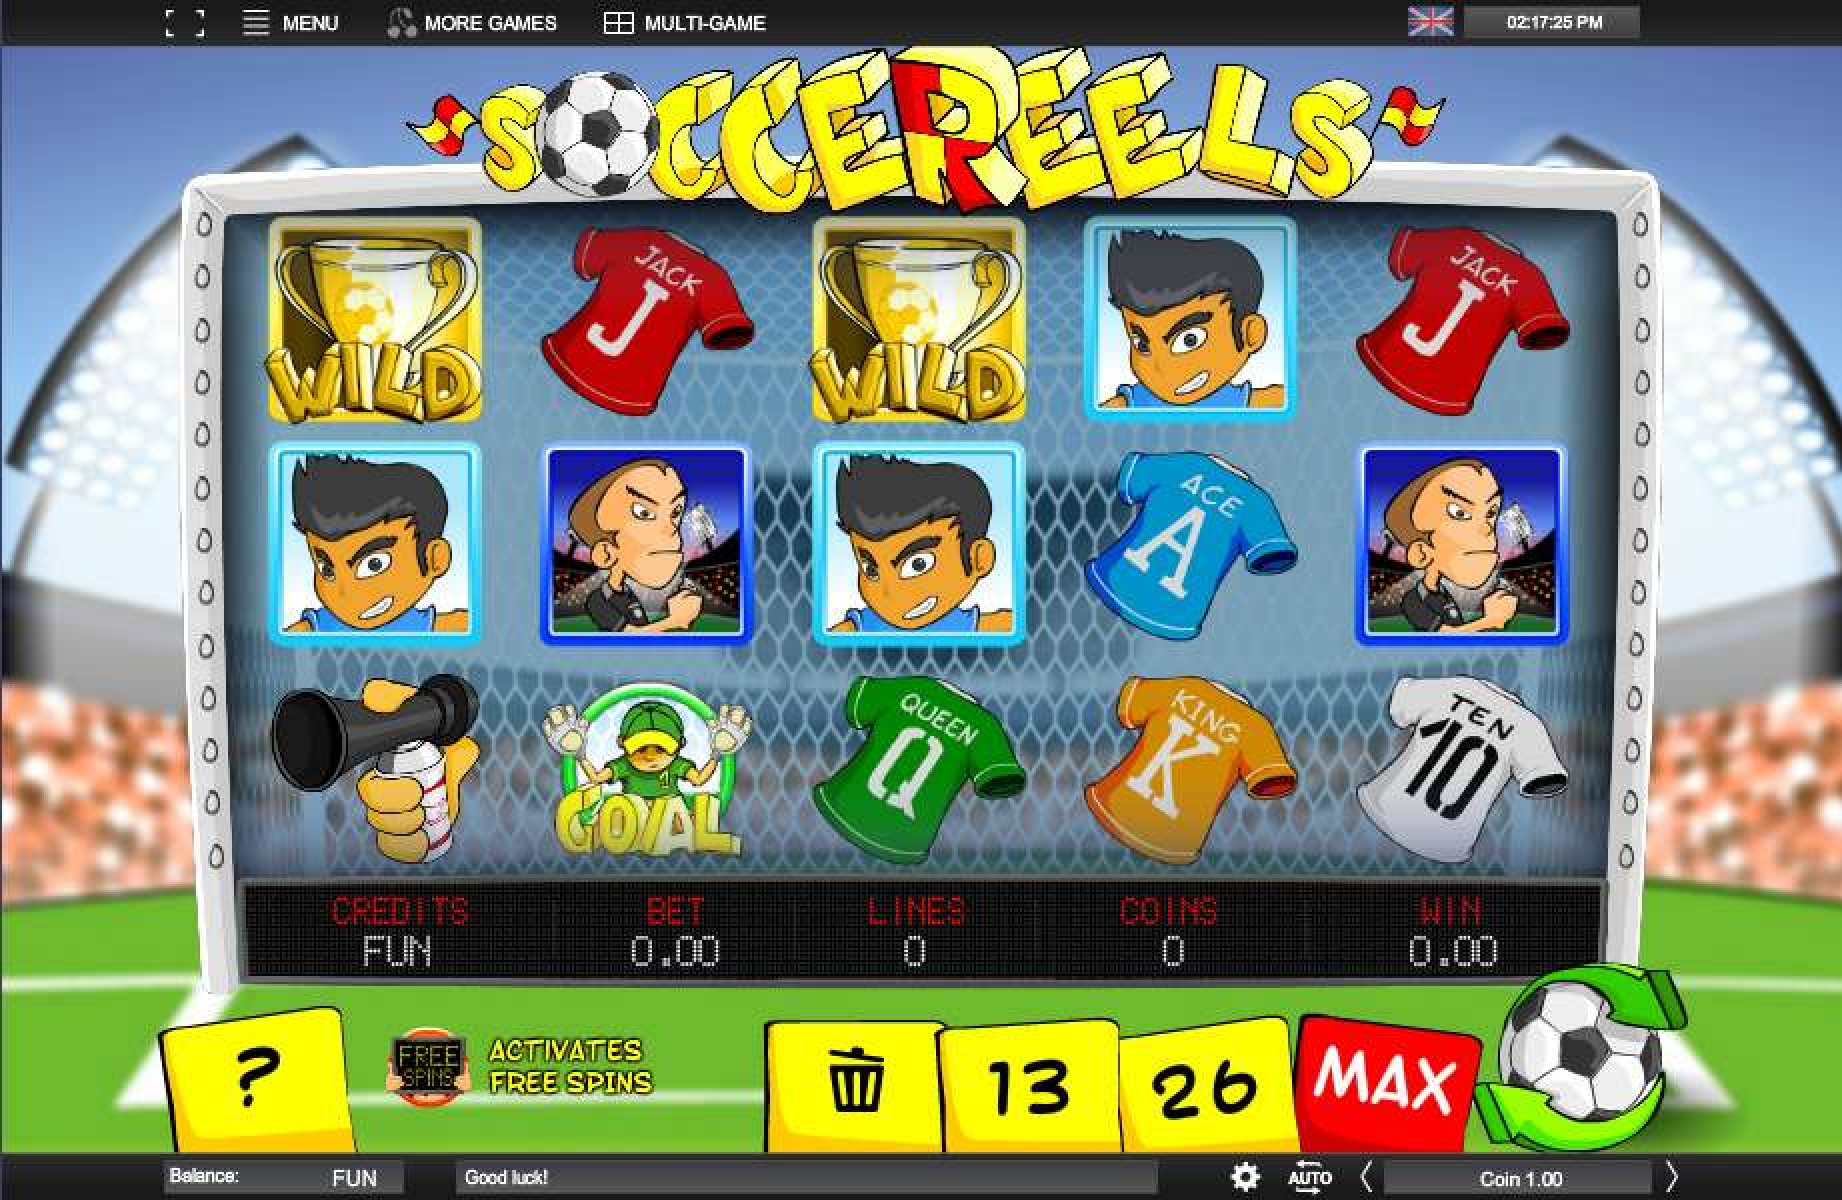 The Soccereels Online Slot Demo Game by Espresso Games